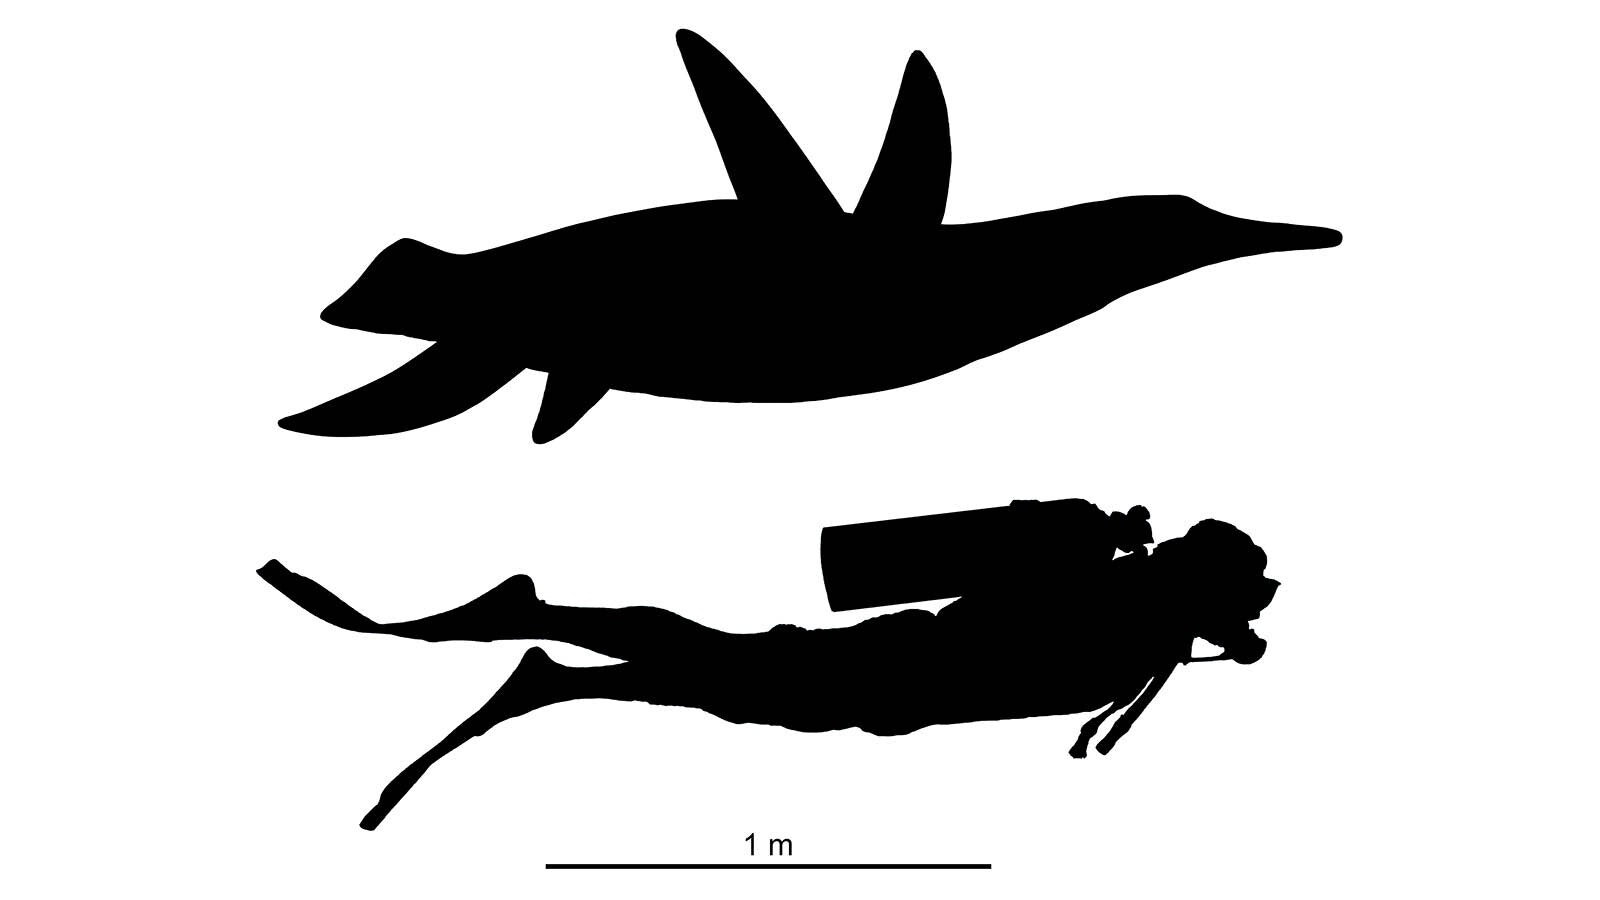 These silhouettes show the approximate size of Unktaheela compared to an average human.